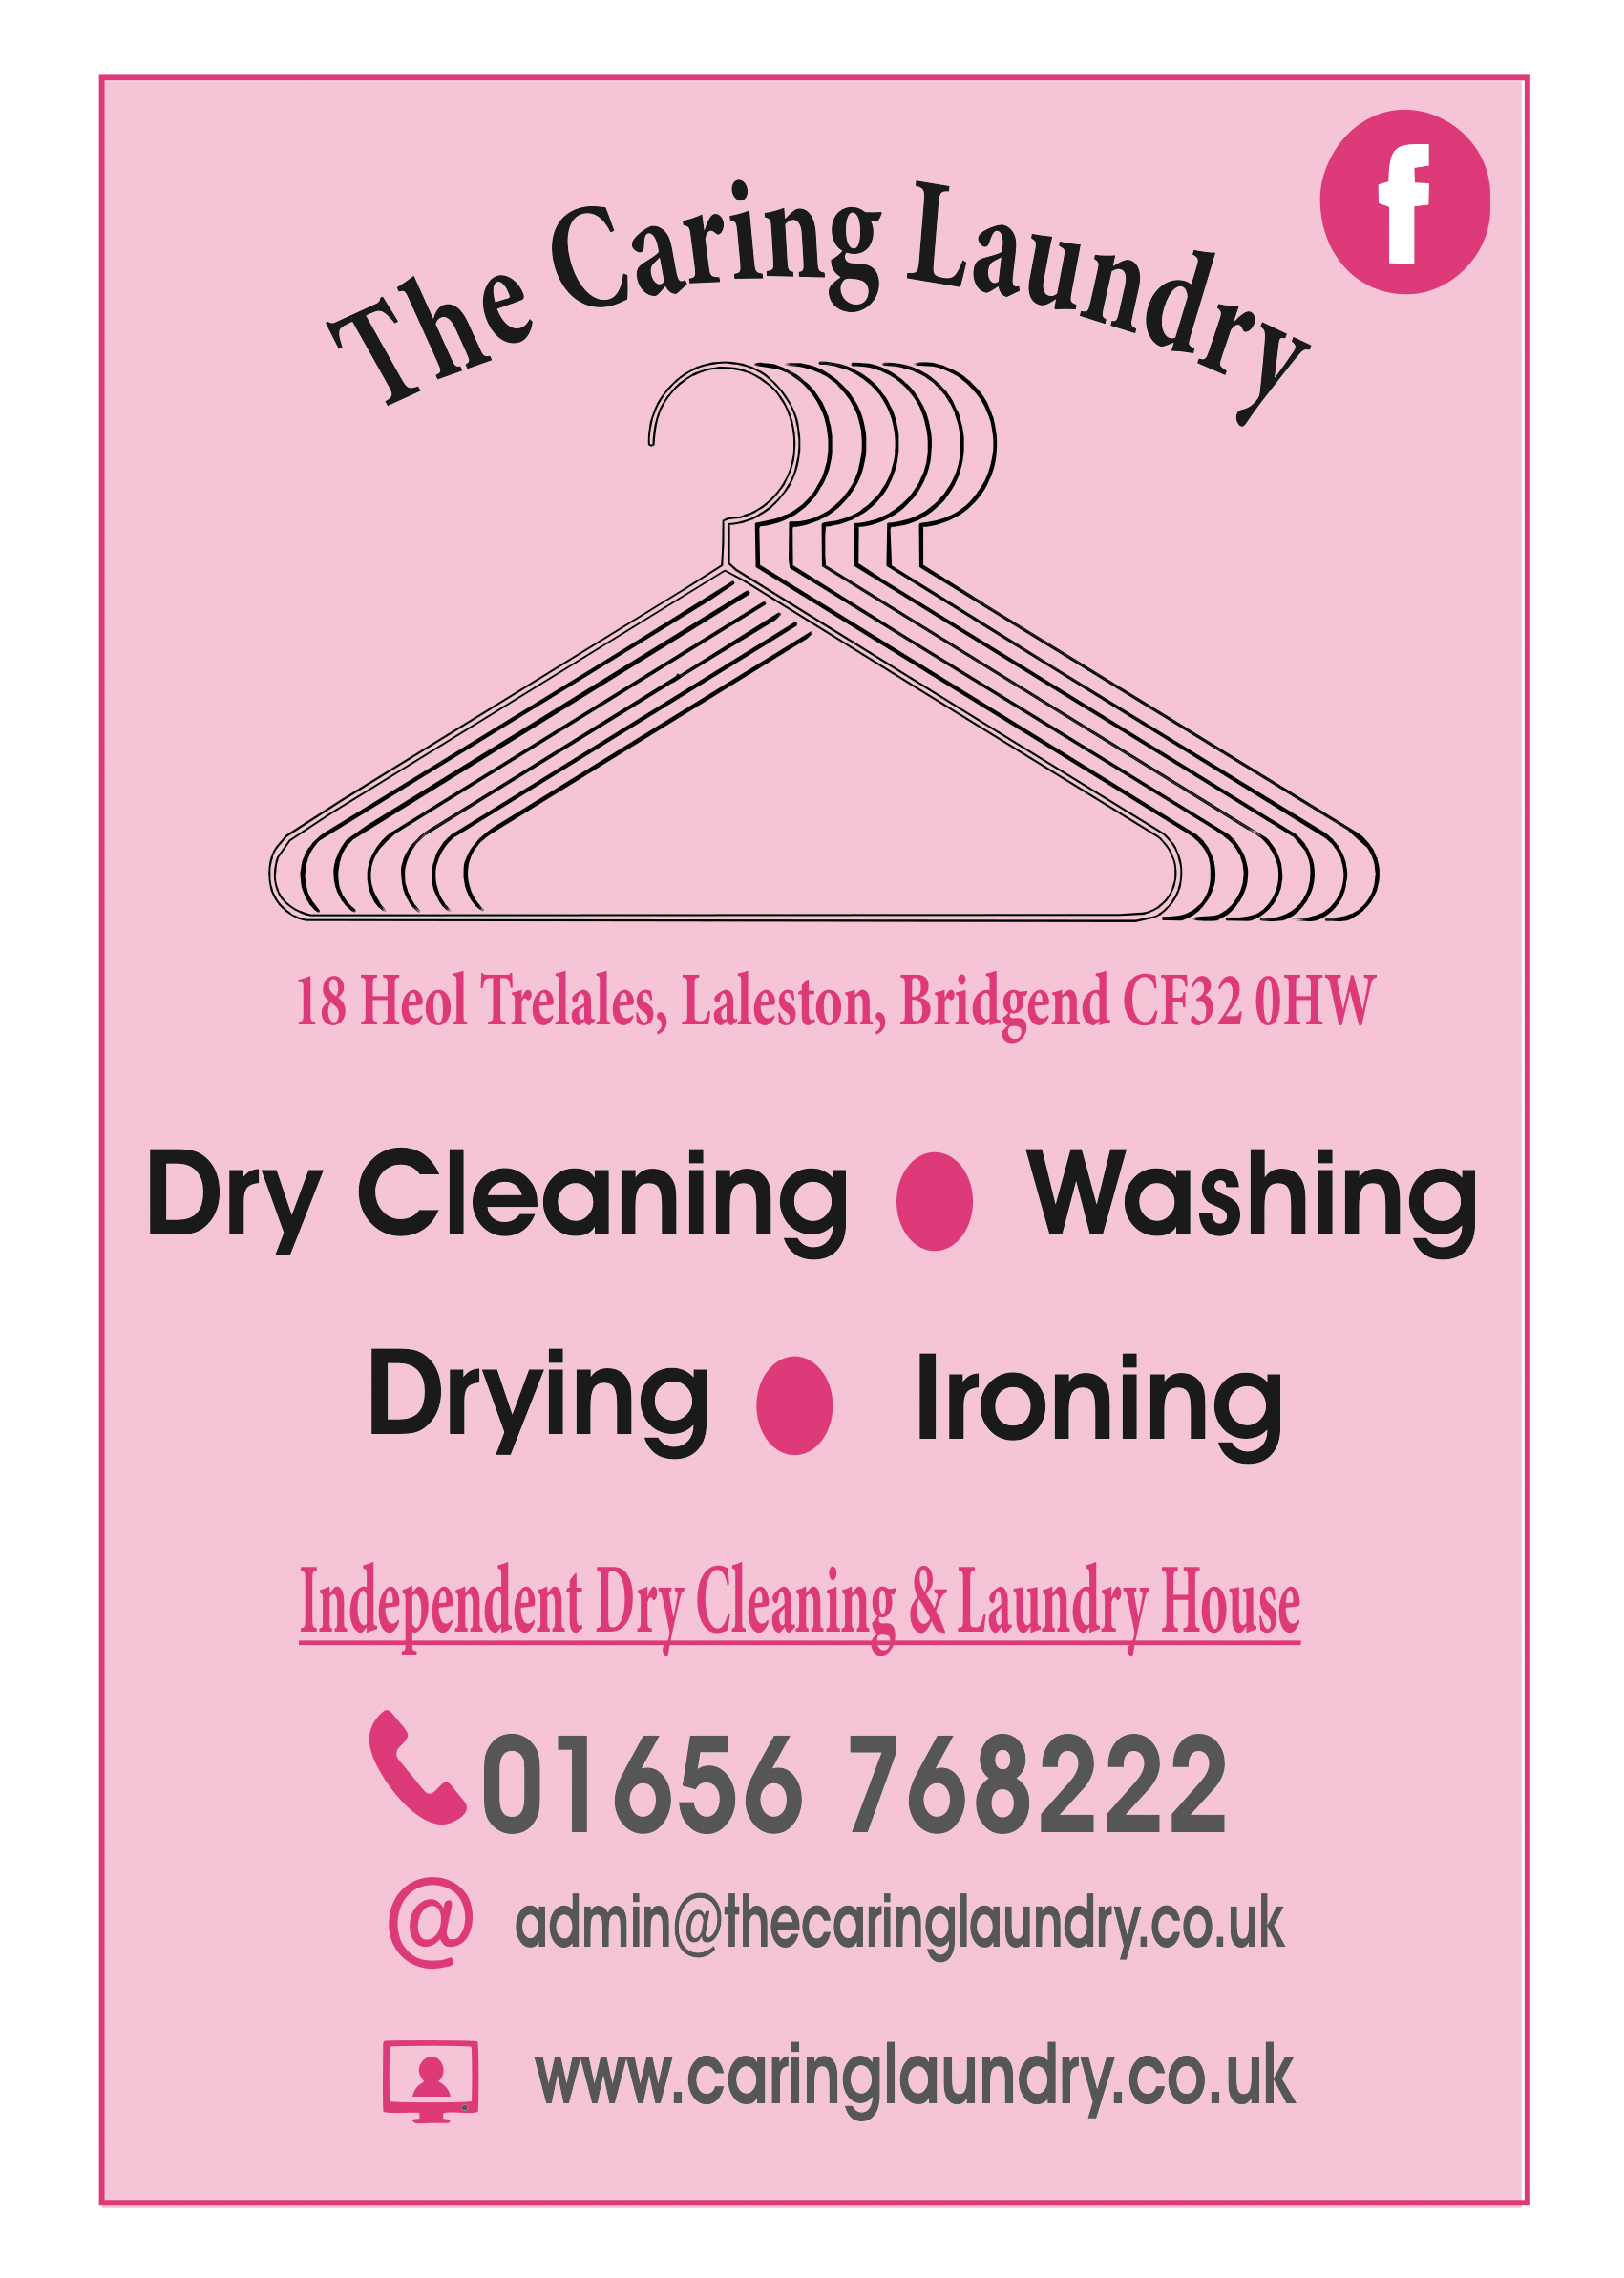 THE-CARING-LAUNDRY-A4-ADVERT-1